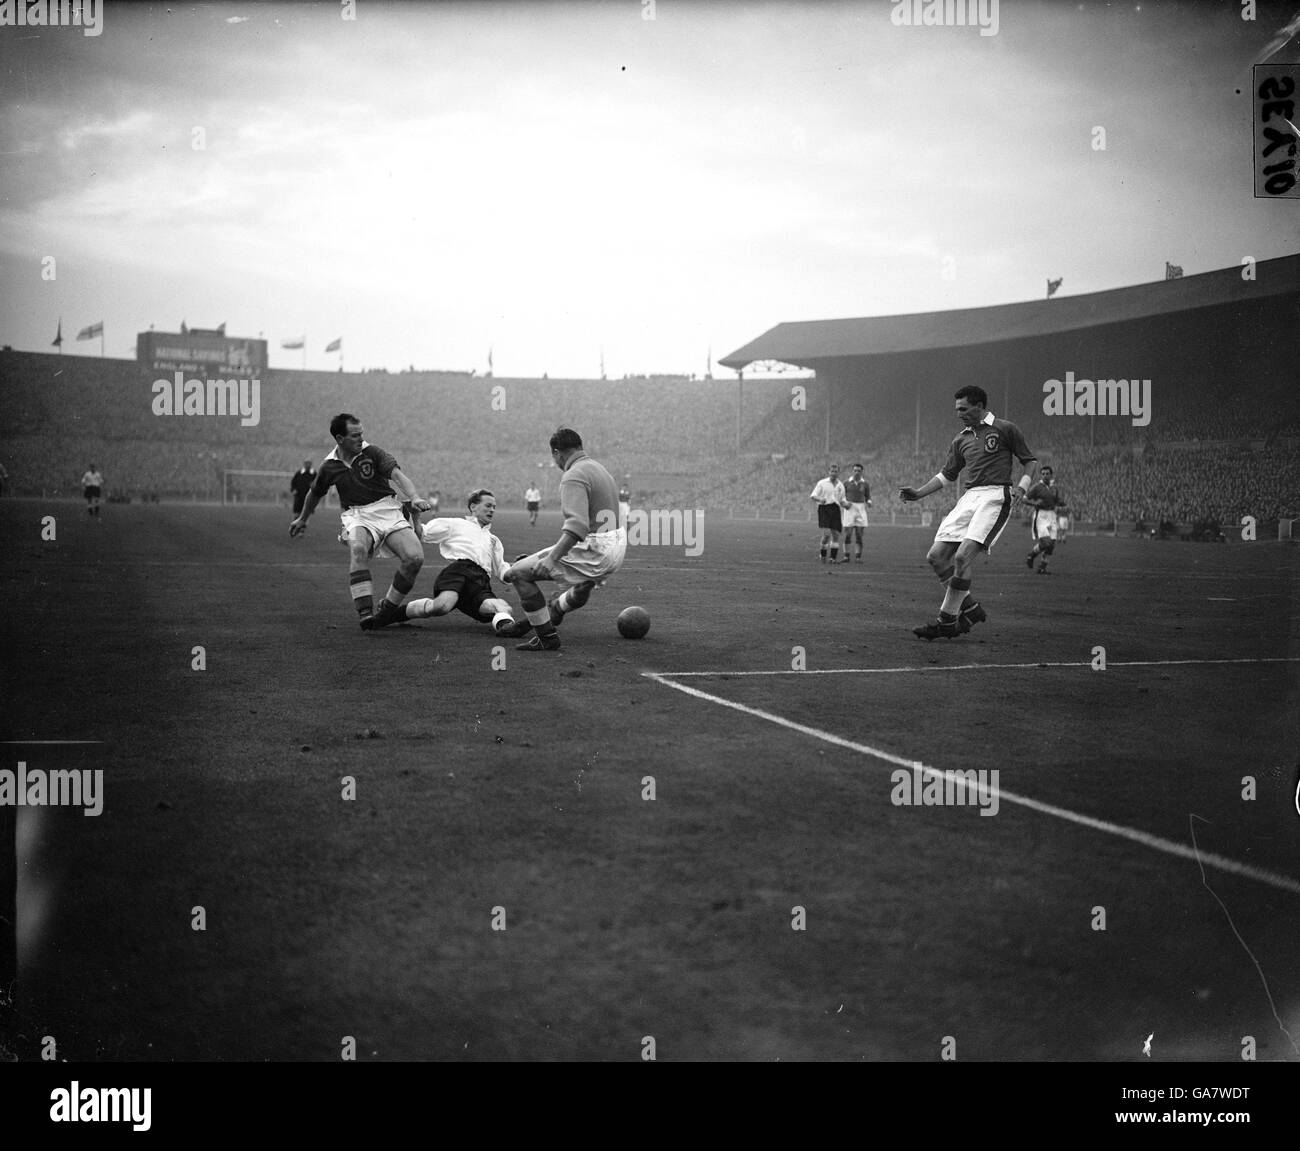 Goal keepers Black and White Stock Photos & Images - Alamy